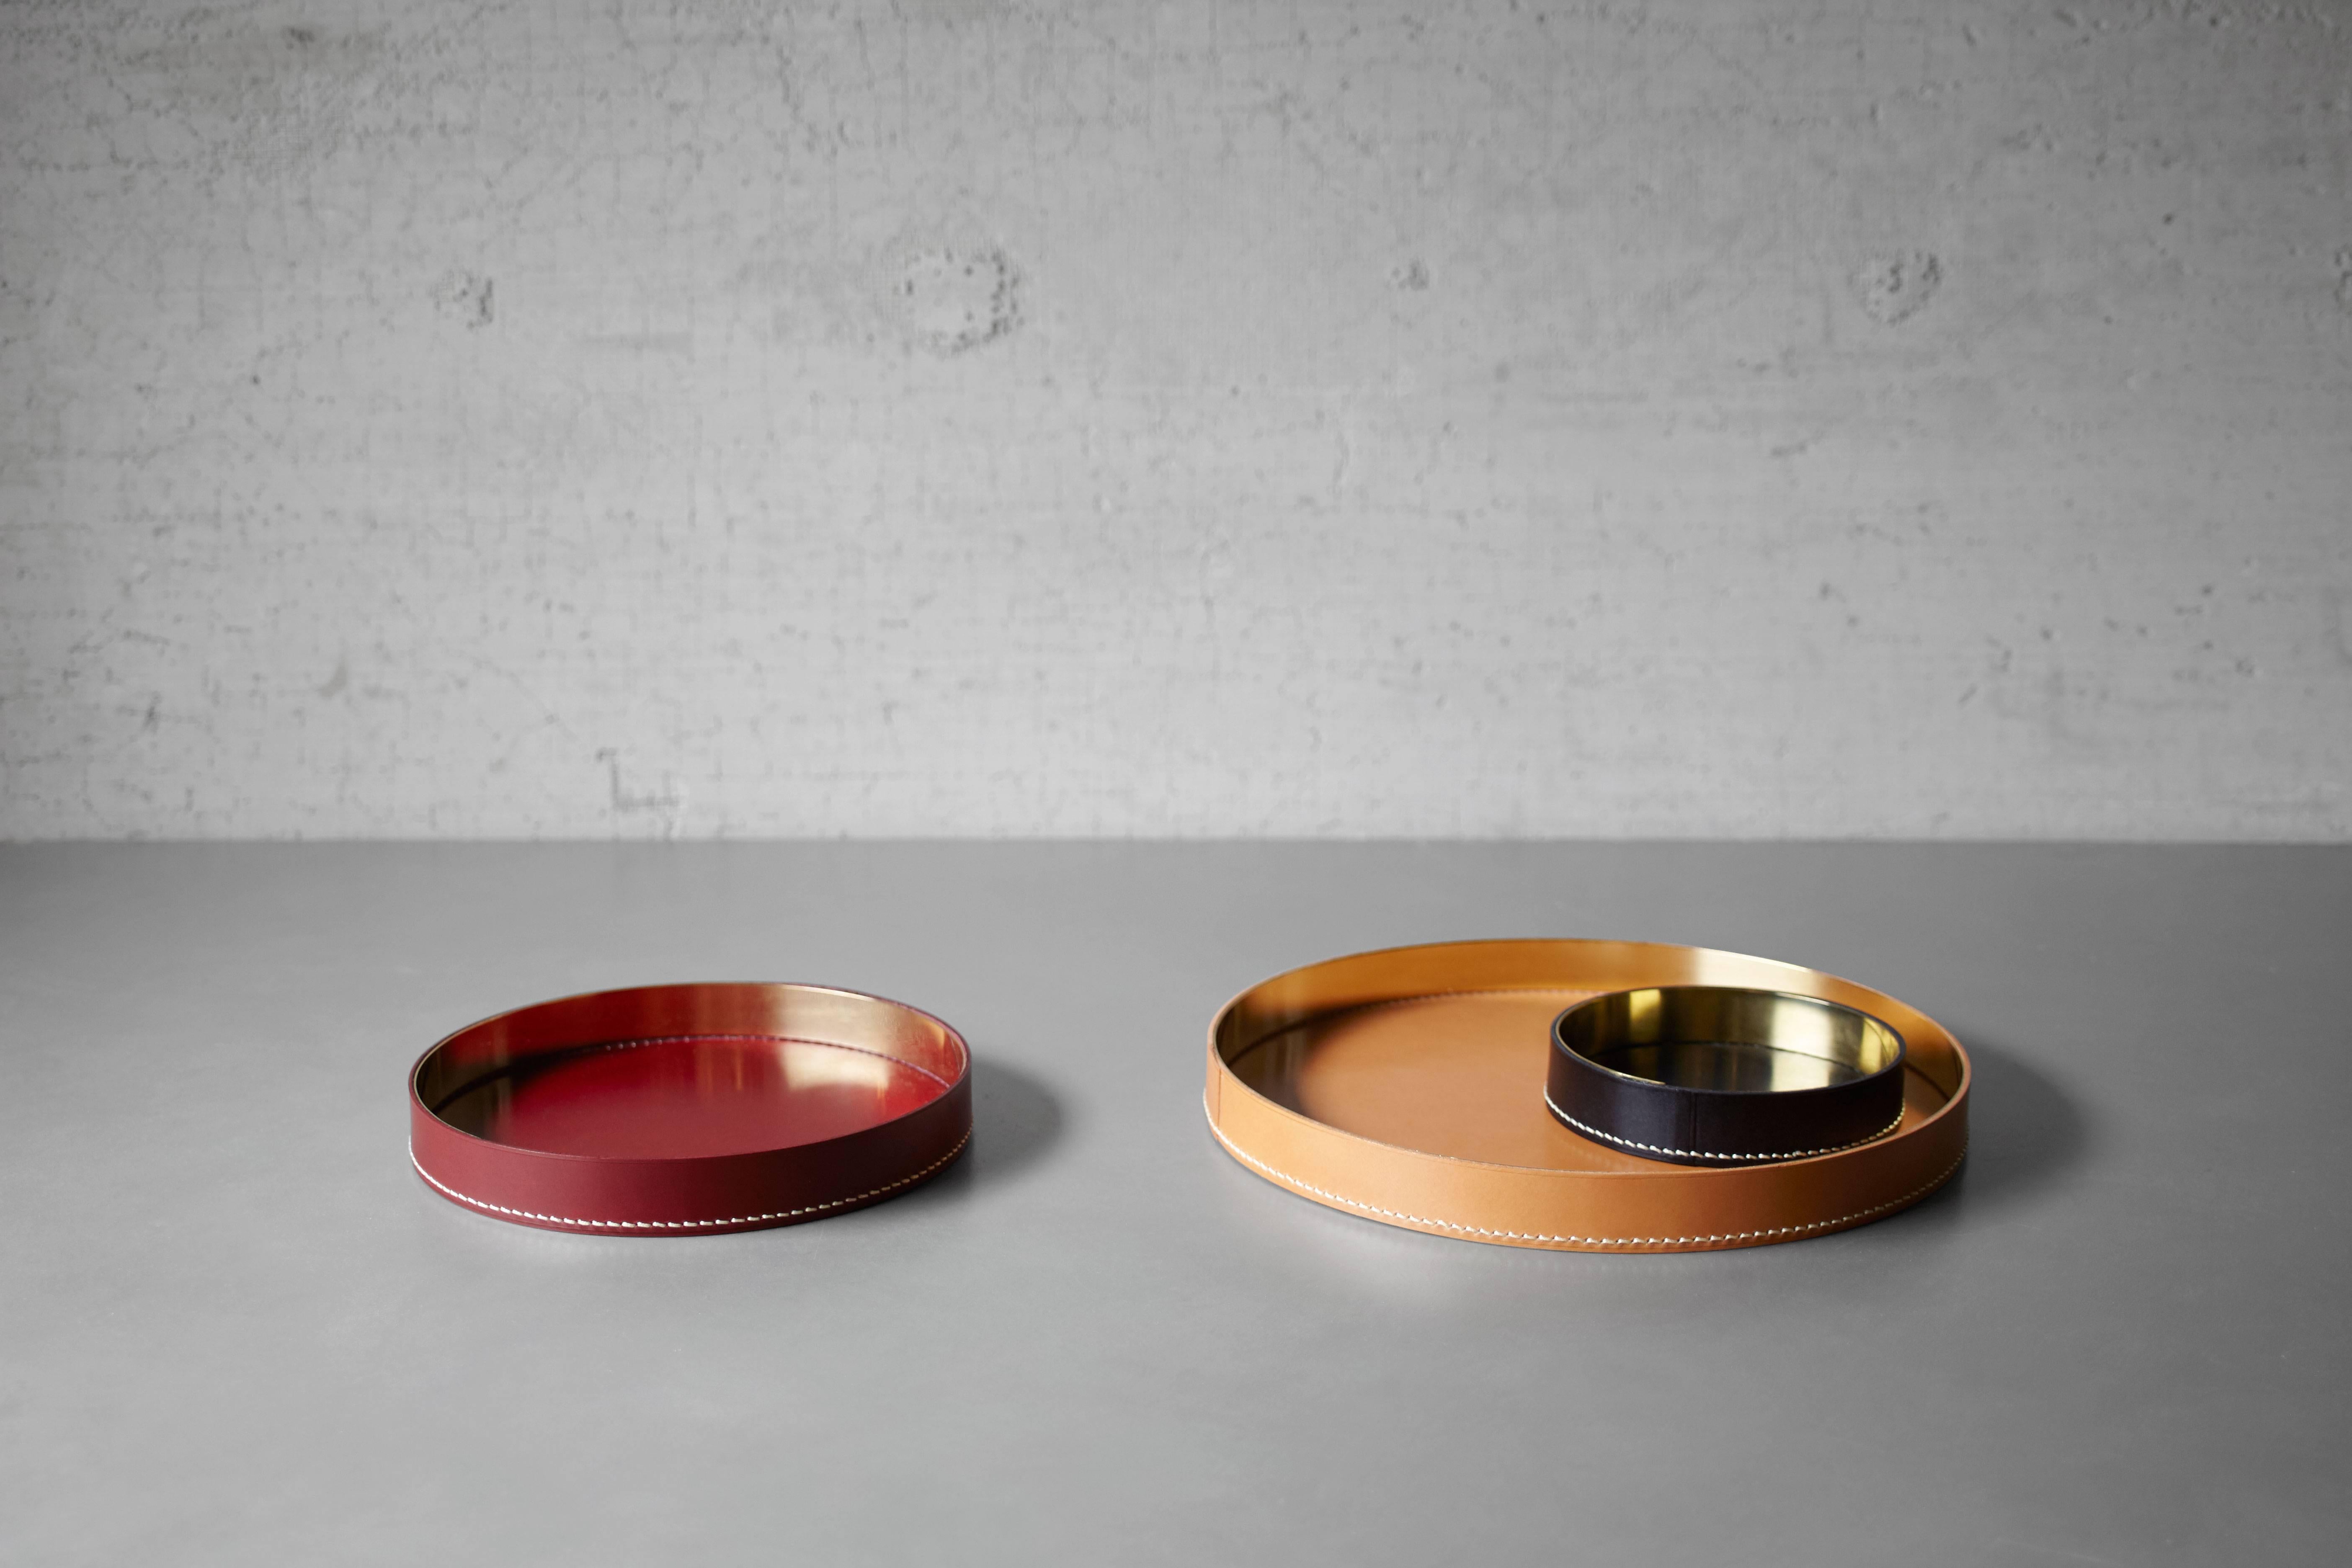 Part of Les Few's Armance collection, this contemporary, black, round, leather and brass, modern, Minimalist tray or centerpiece is made by artisans in Sweden. The leather comes in black but can be special ordered in burgundy or cognac. The brass is